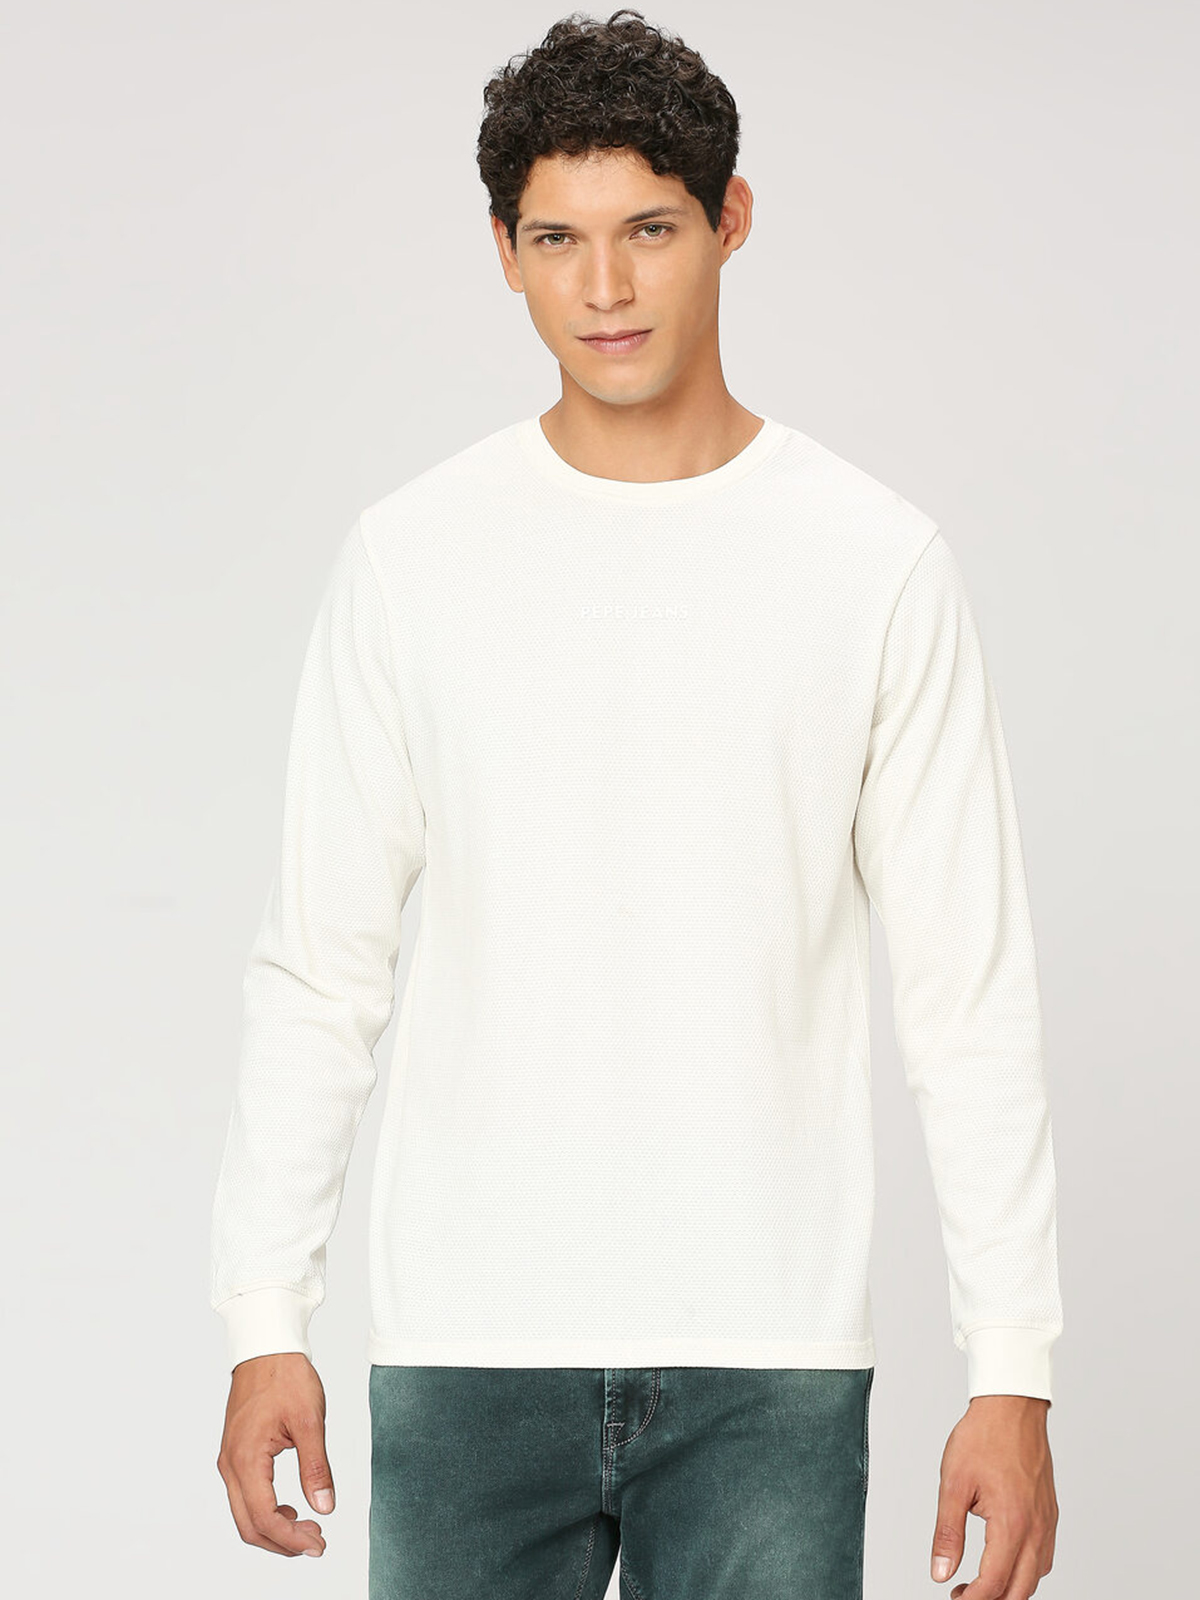 Pepe Jeans plain knitted white t shirt - G3-MTS16615